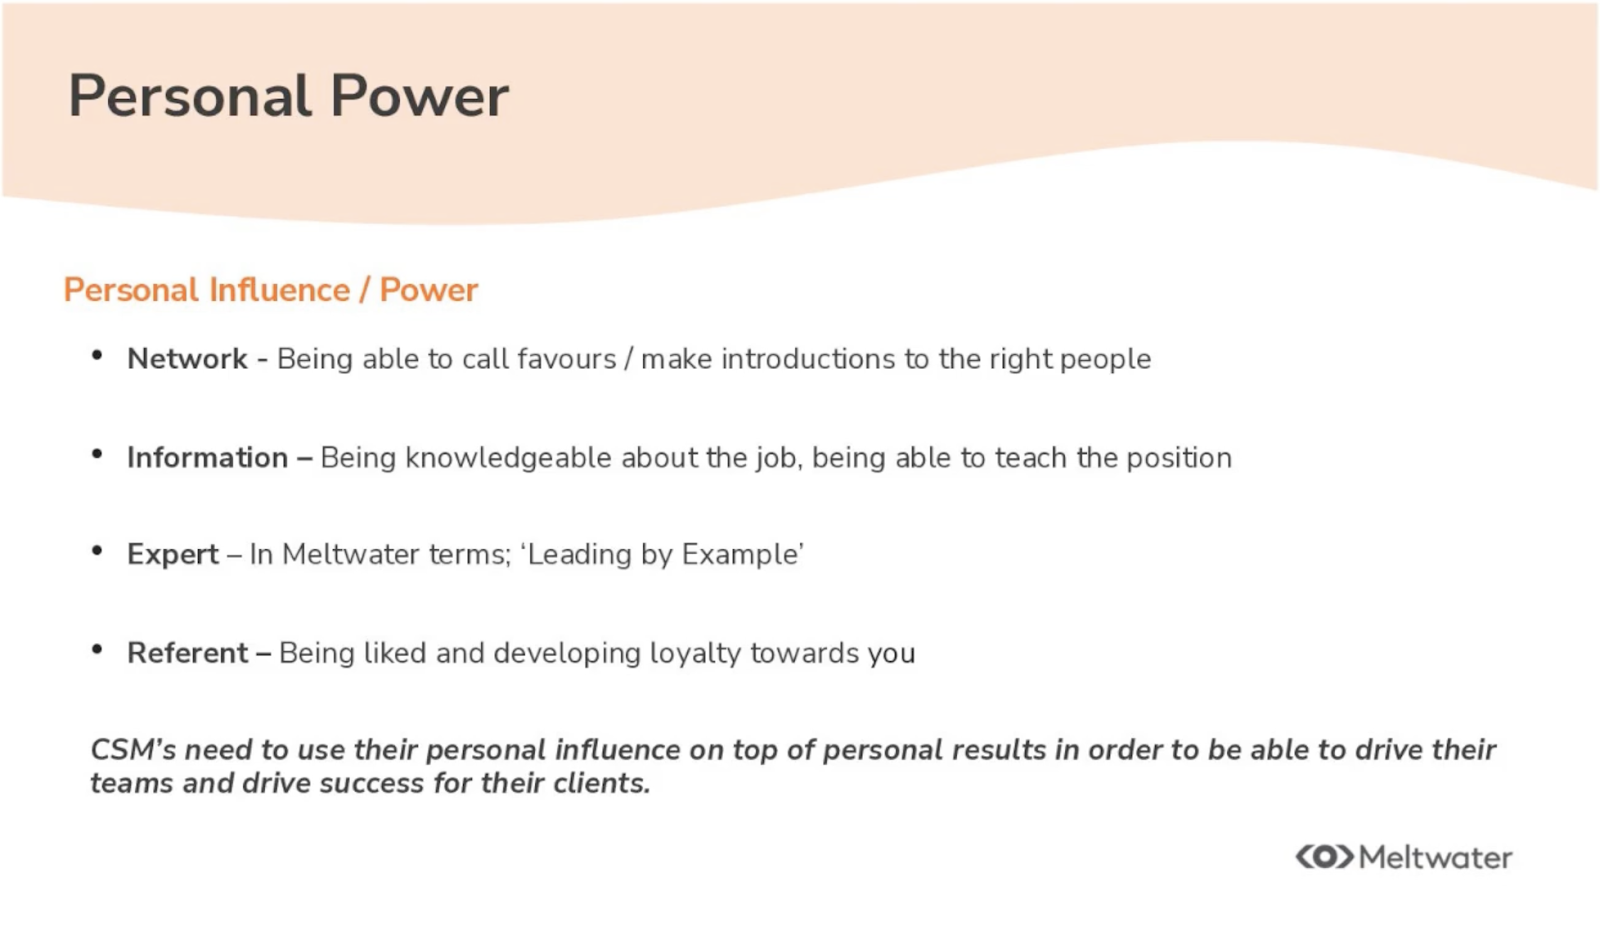 Personal influence/power